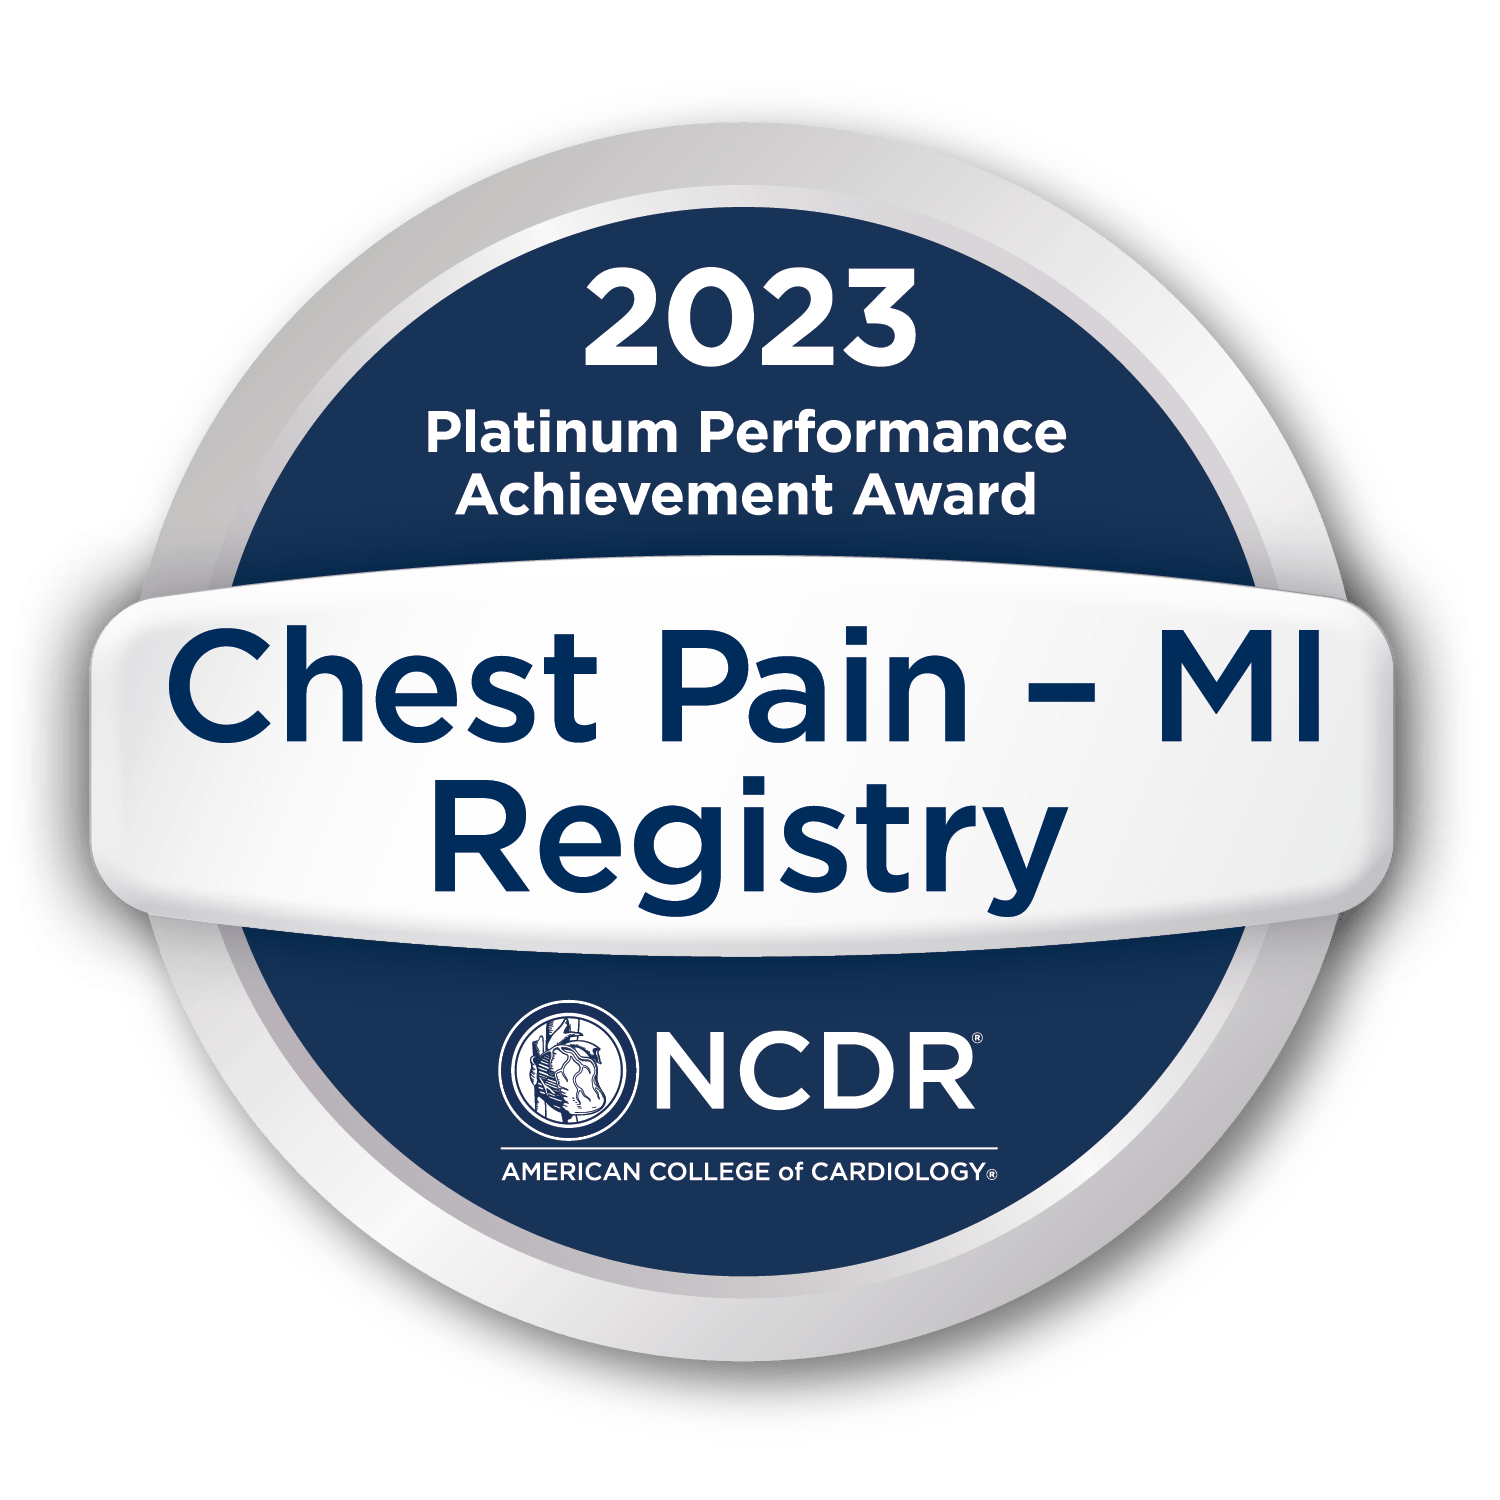 We’ve demonstrated sustained achievement in the Chest Pain – MI Registry for two consecutive years (2021 and 2022) and performed at the highest level for specific performance measures to receive this 2023 award.